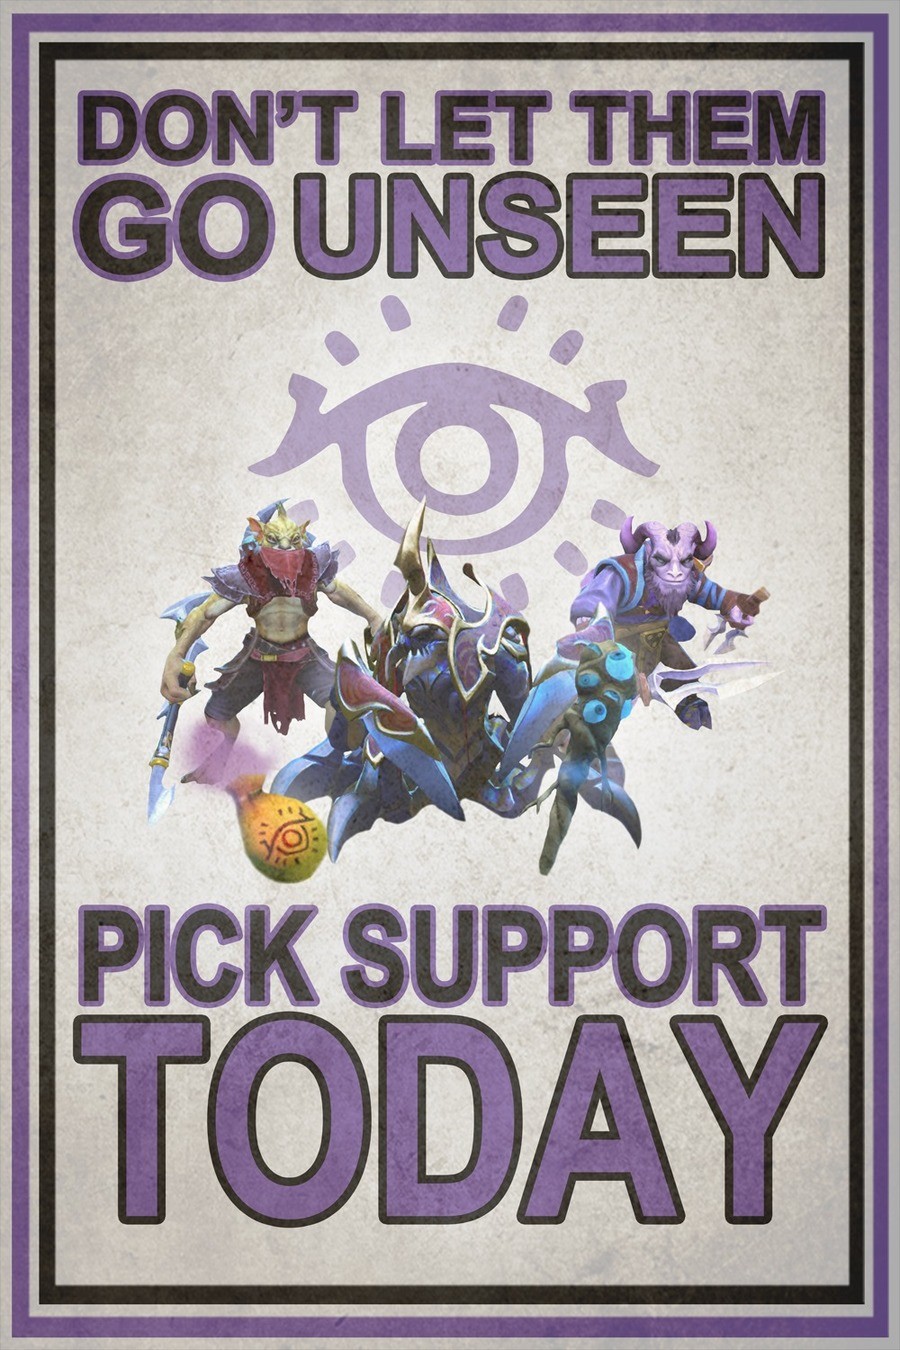 Dota 2 Support Posters